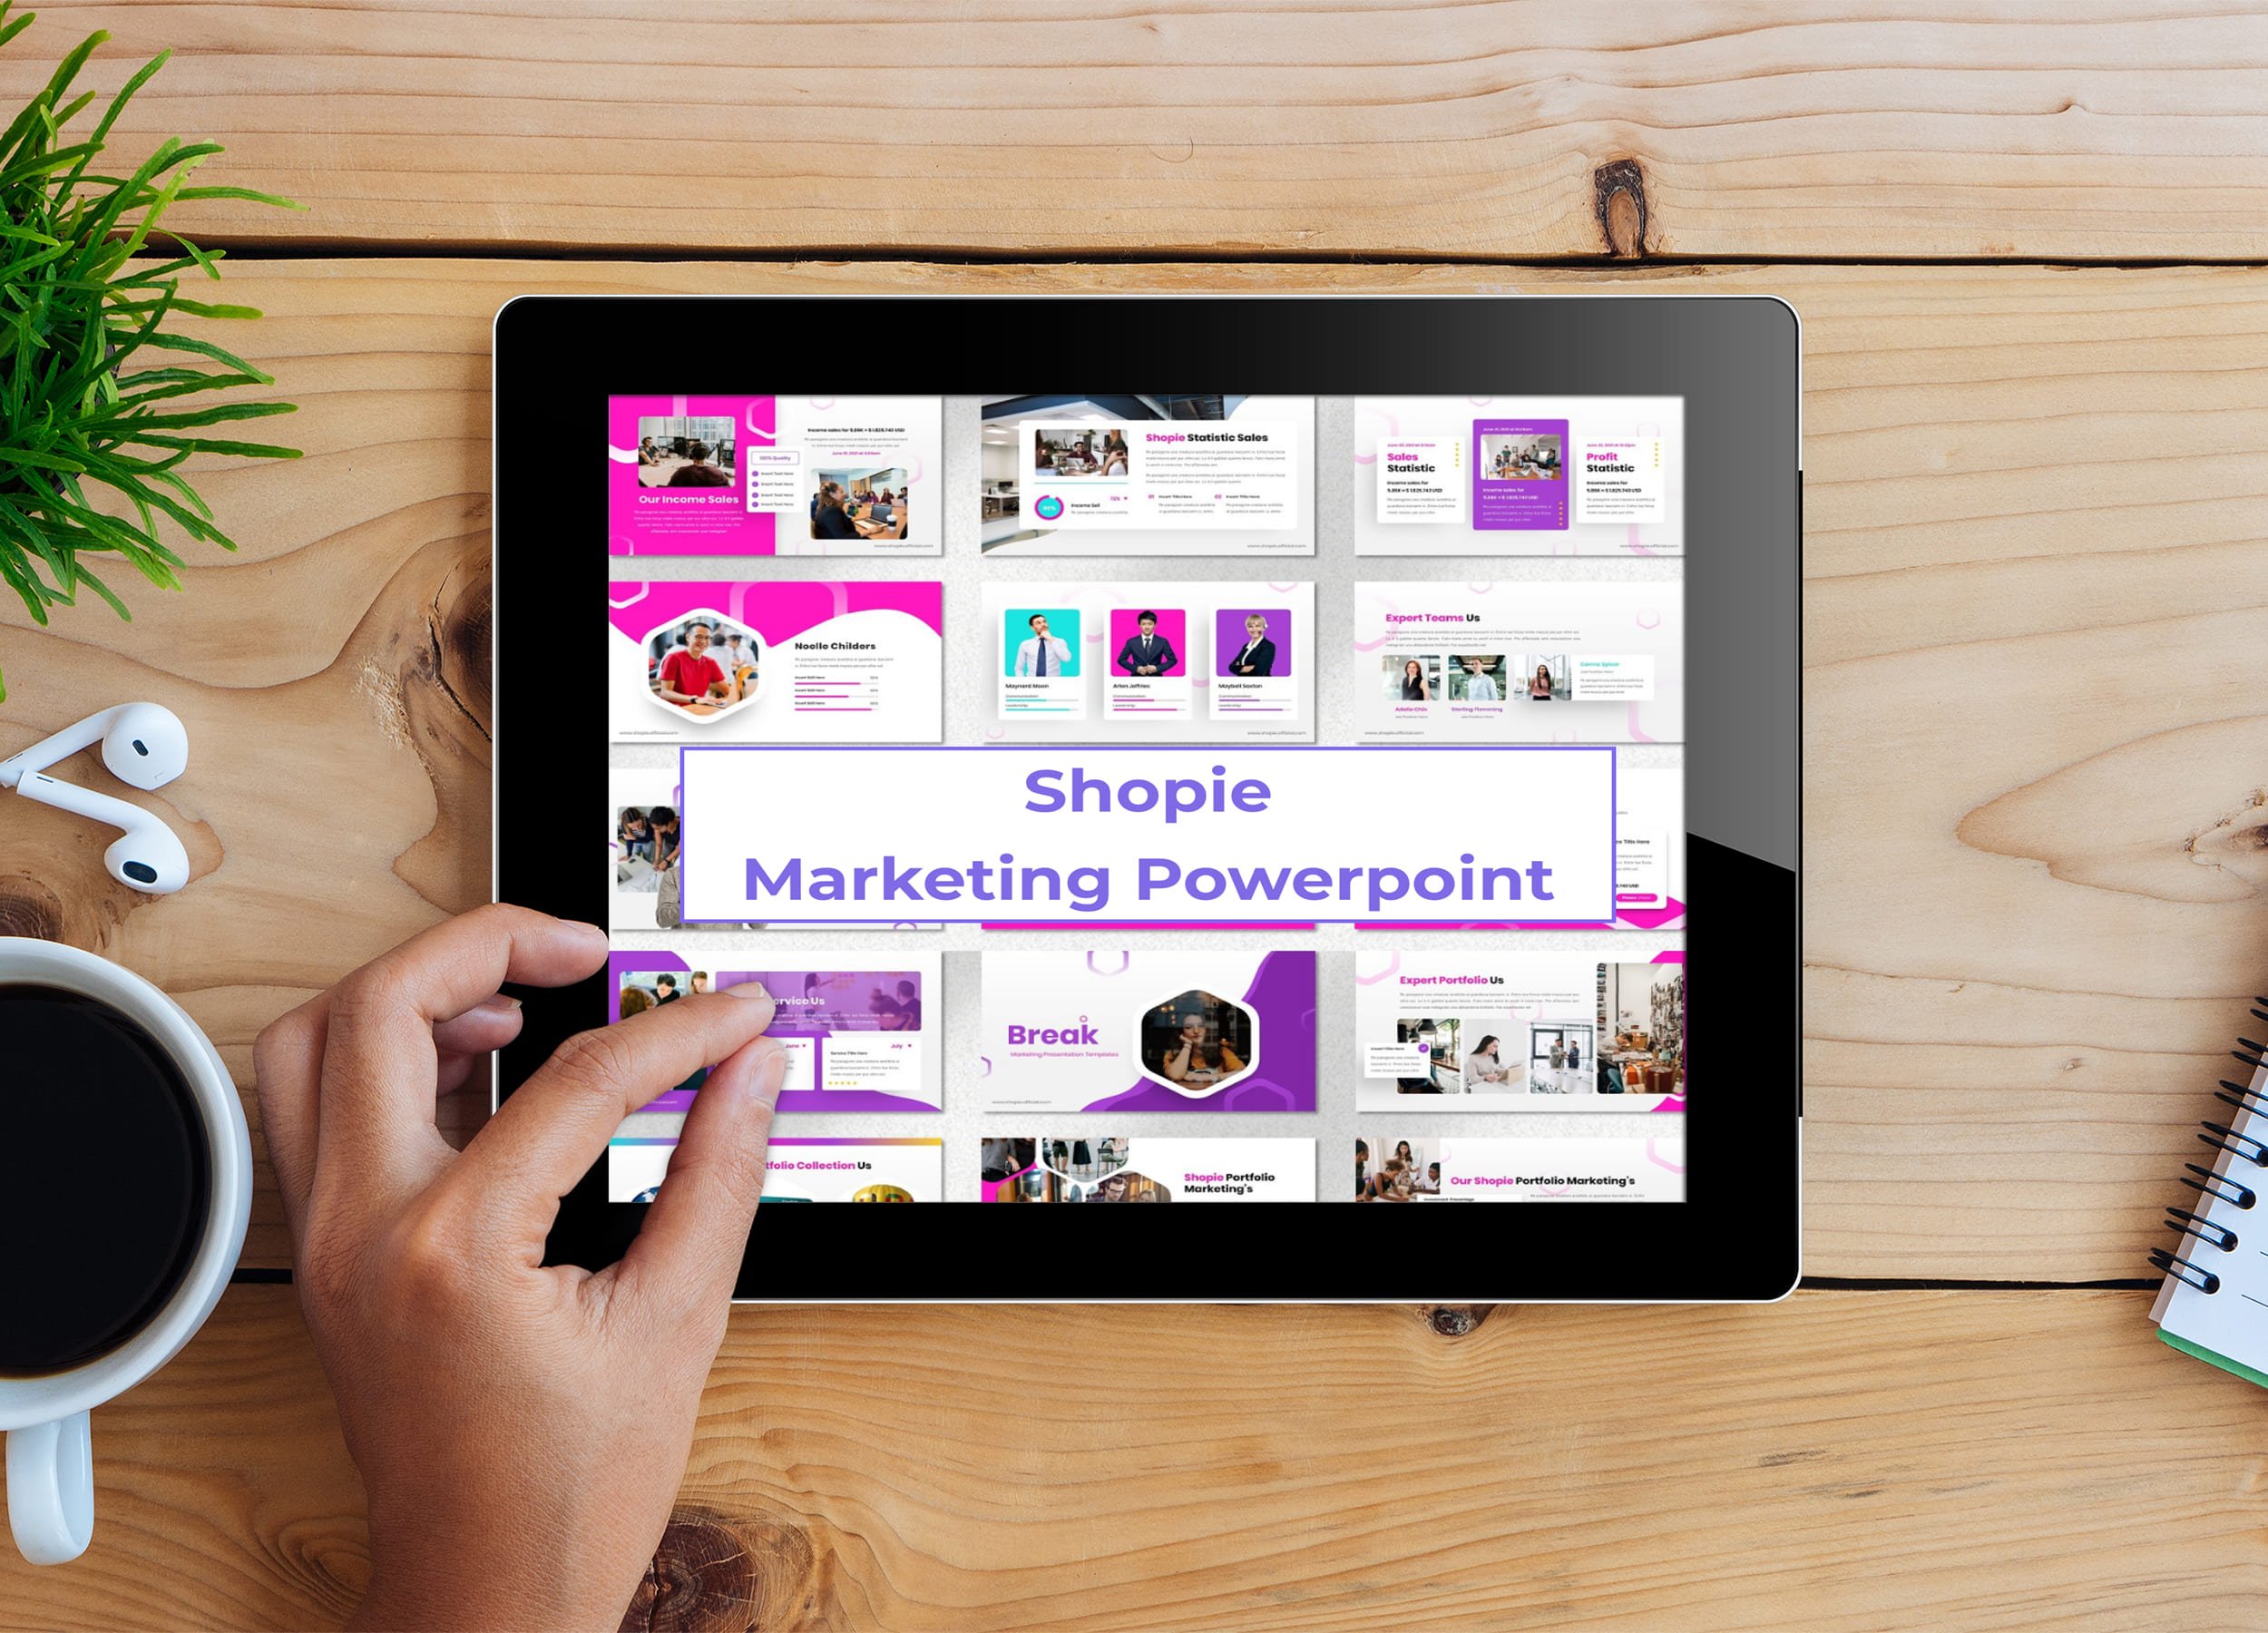 Tablet option of the Shopie - Marketing Powerpoint.